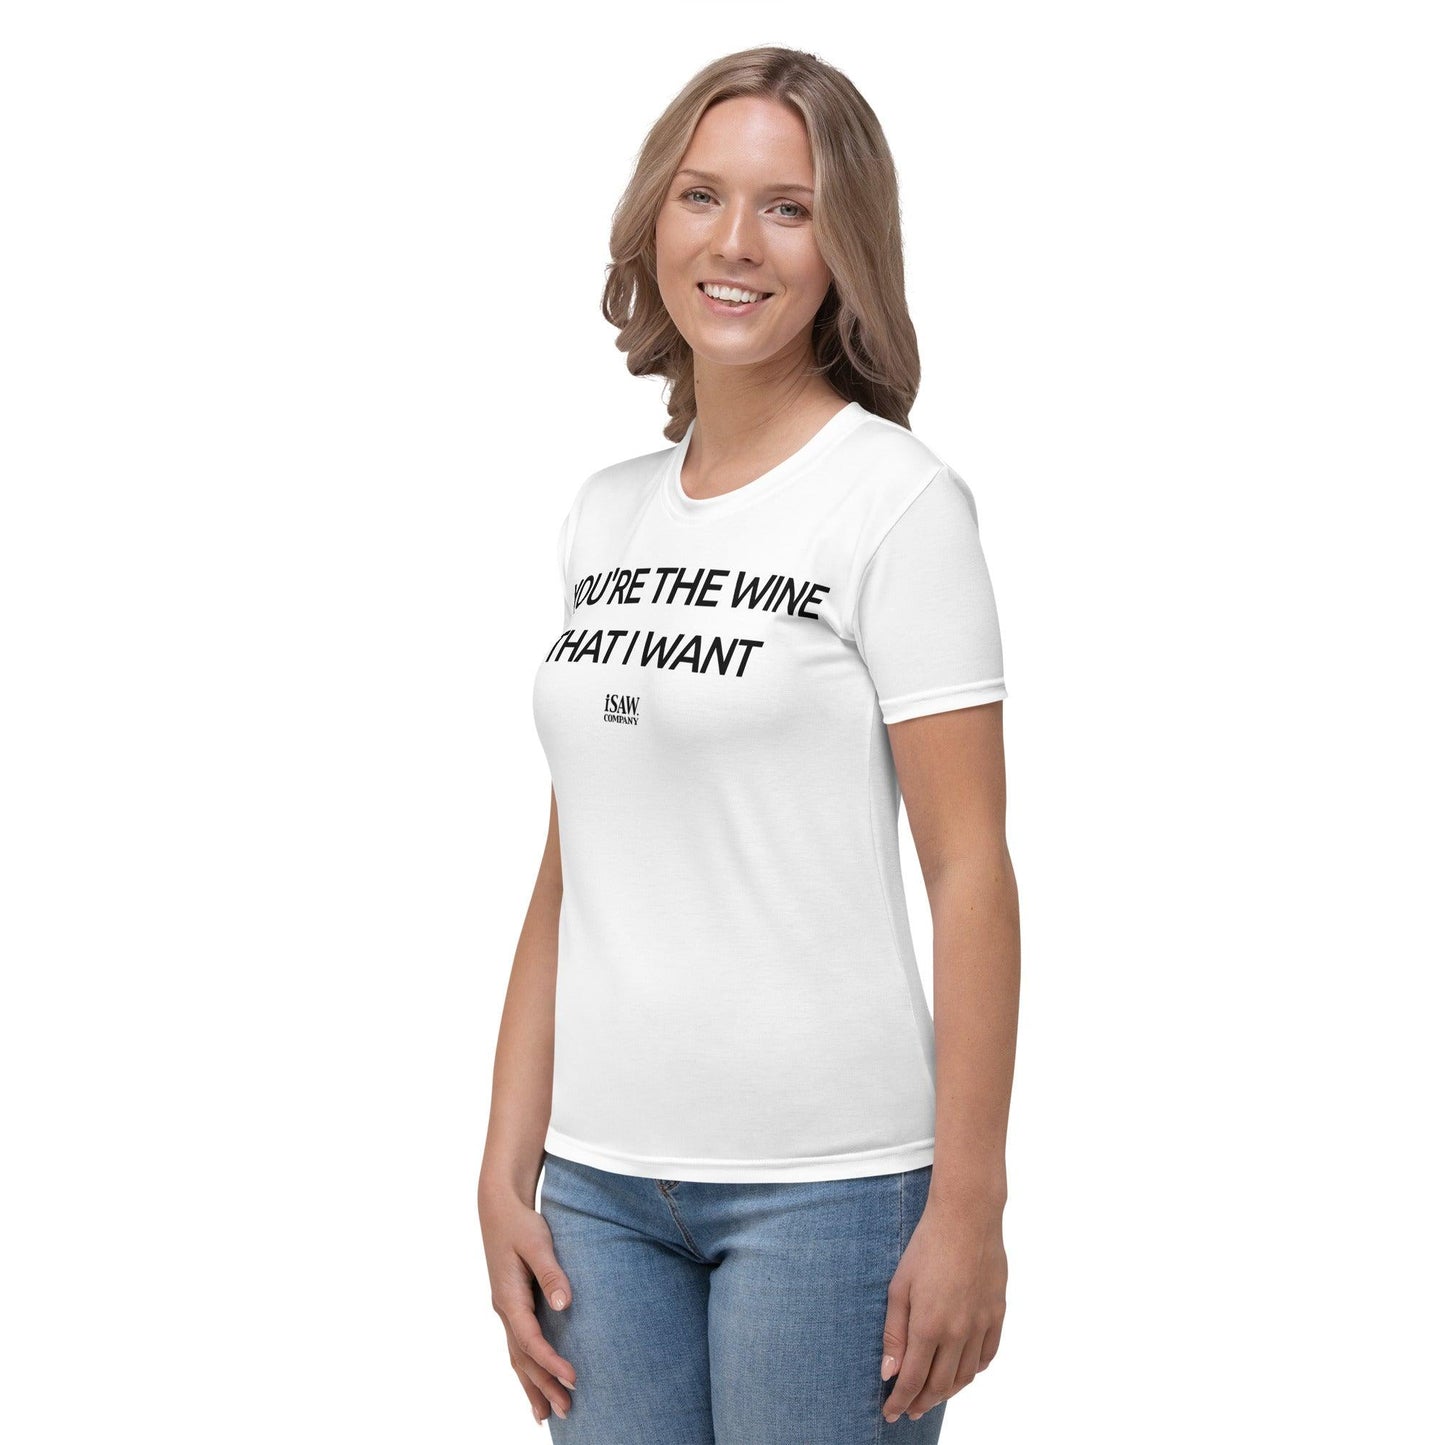 You’re The Wine That I Want - Womens White T-Shirt - iSAW Company